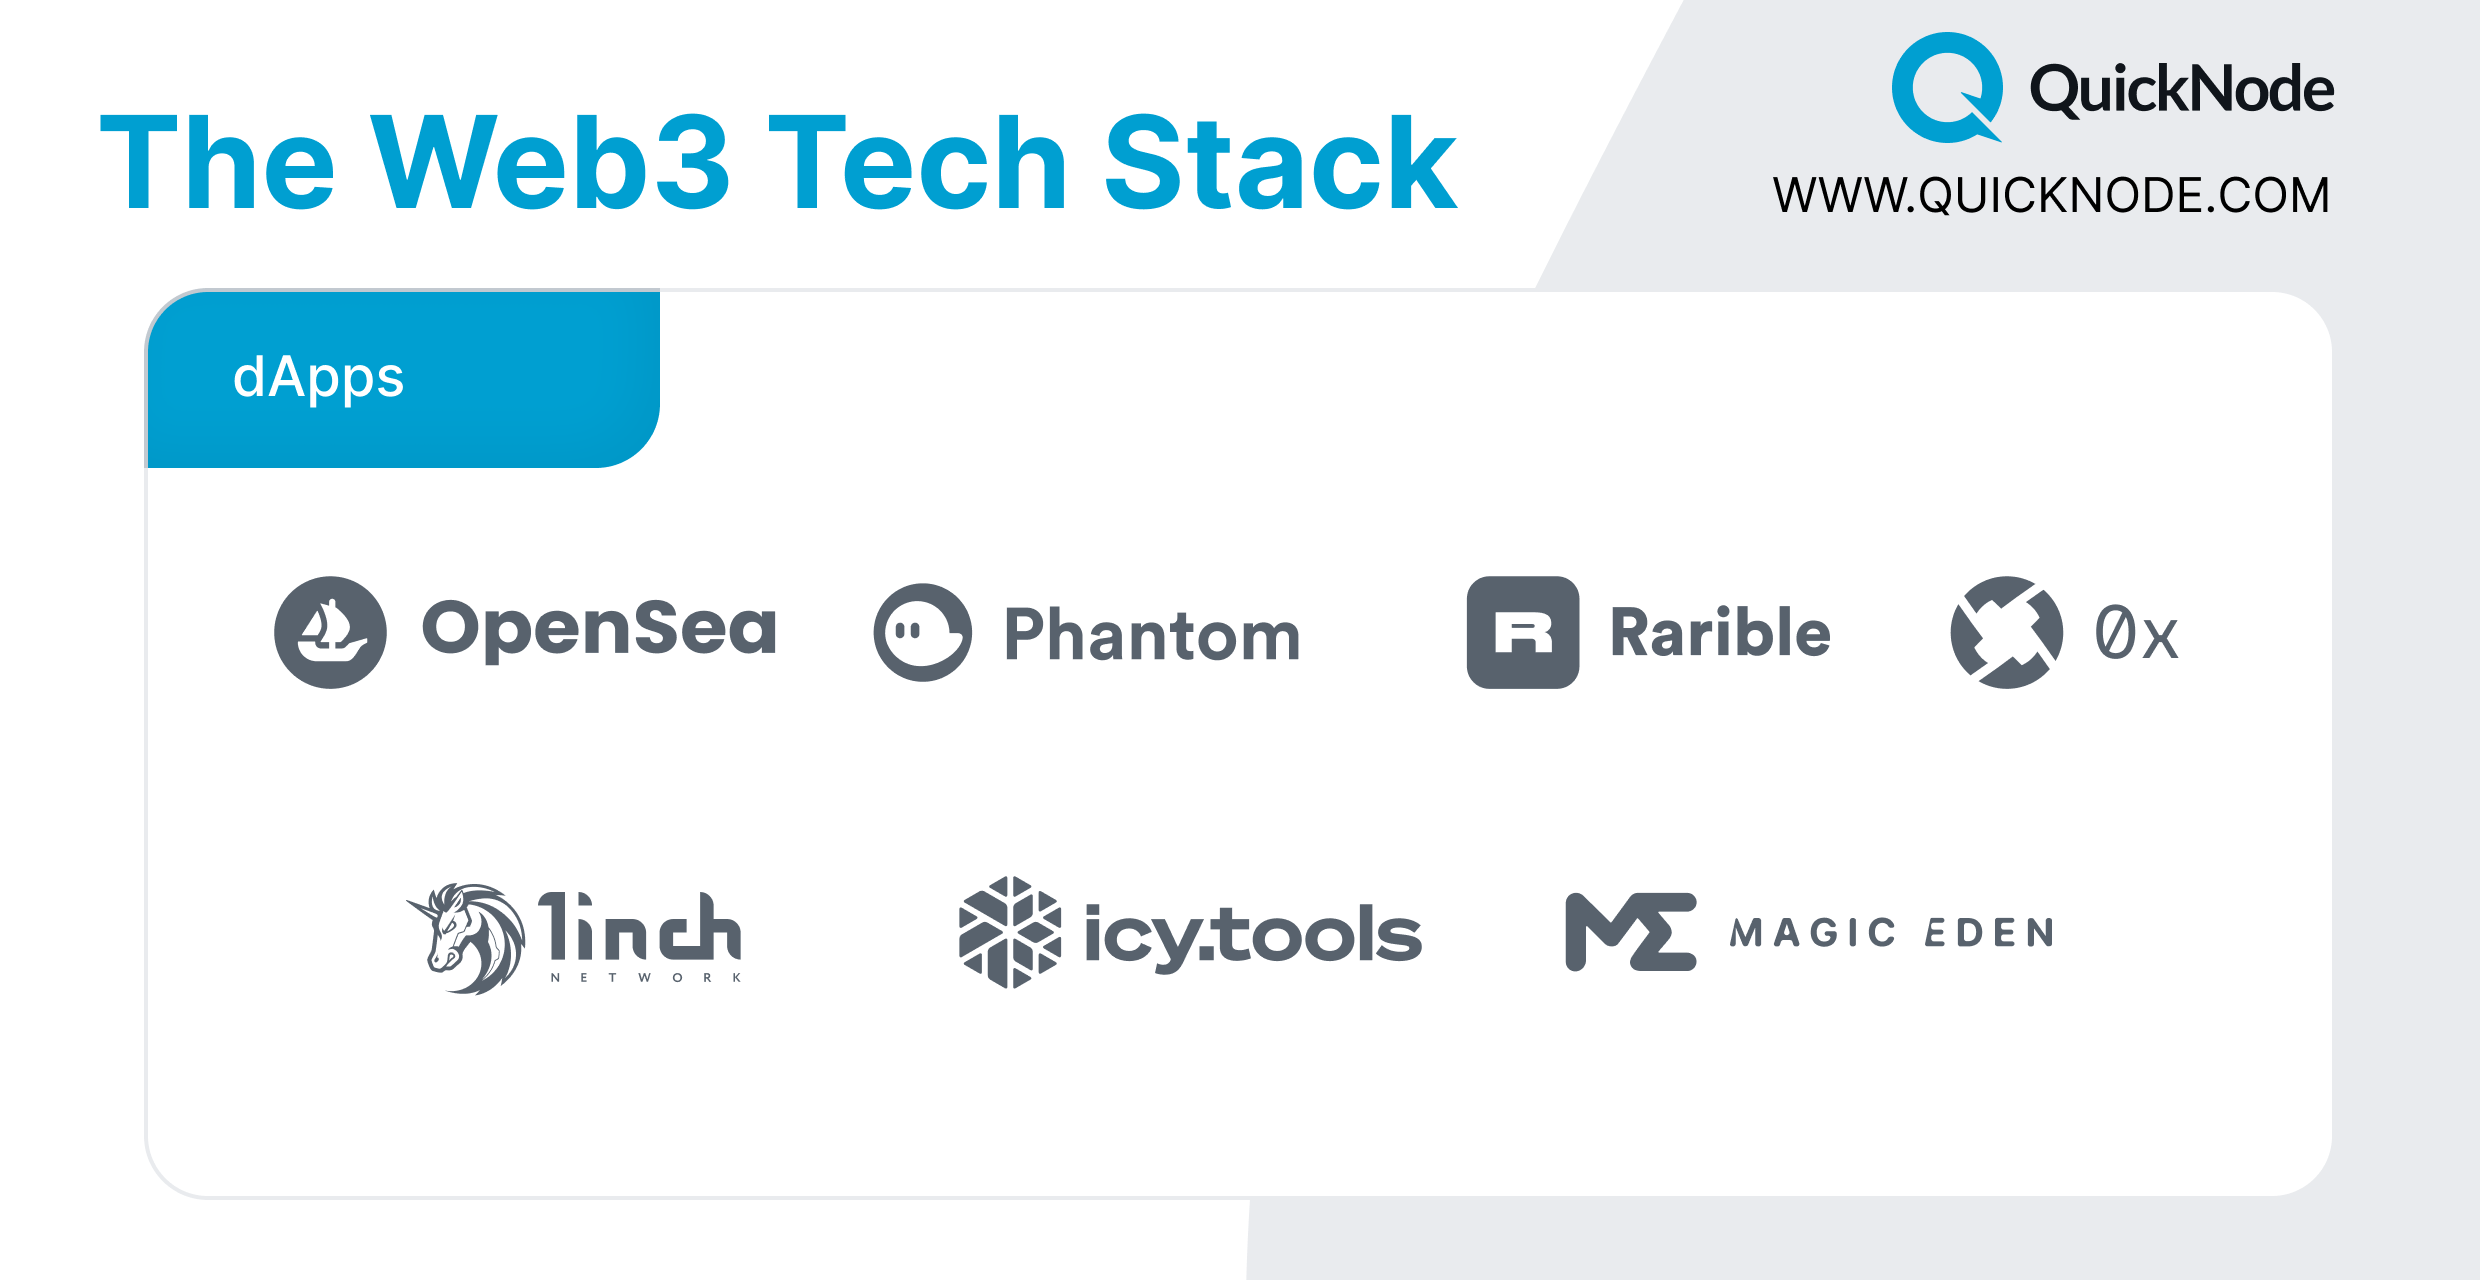 The simplified web3 developer tech stack from QuickNode — dApp layer